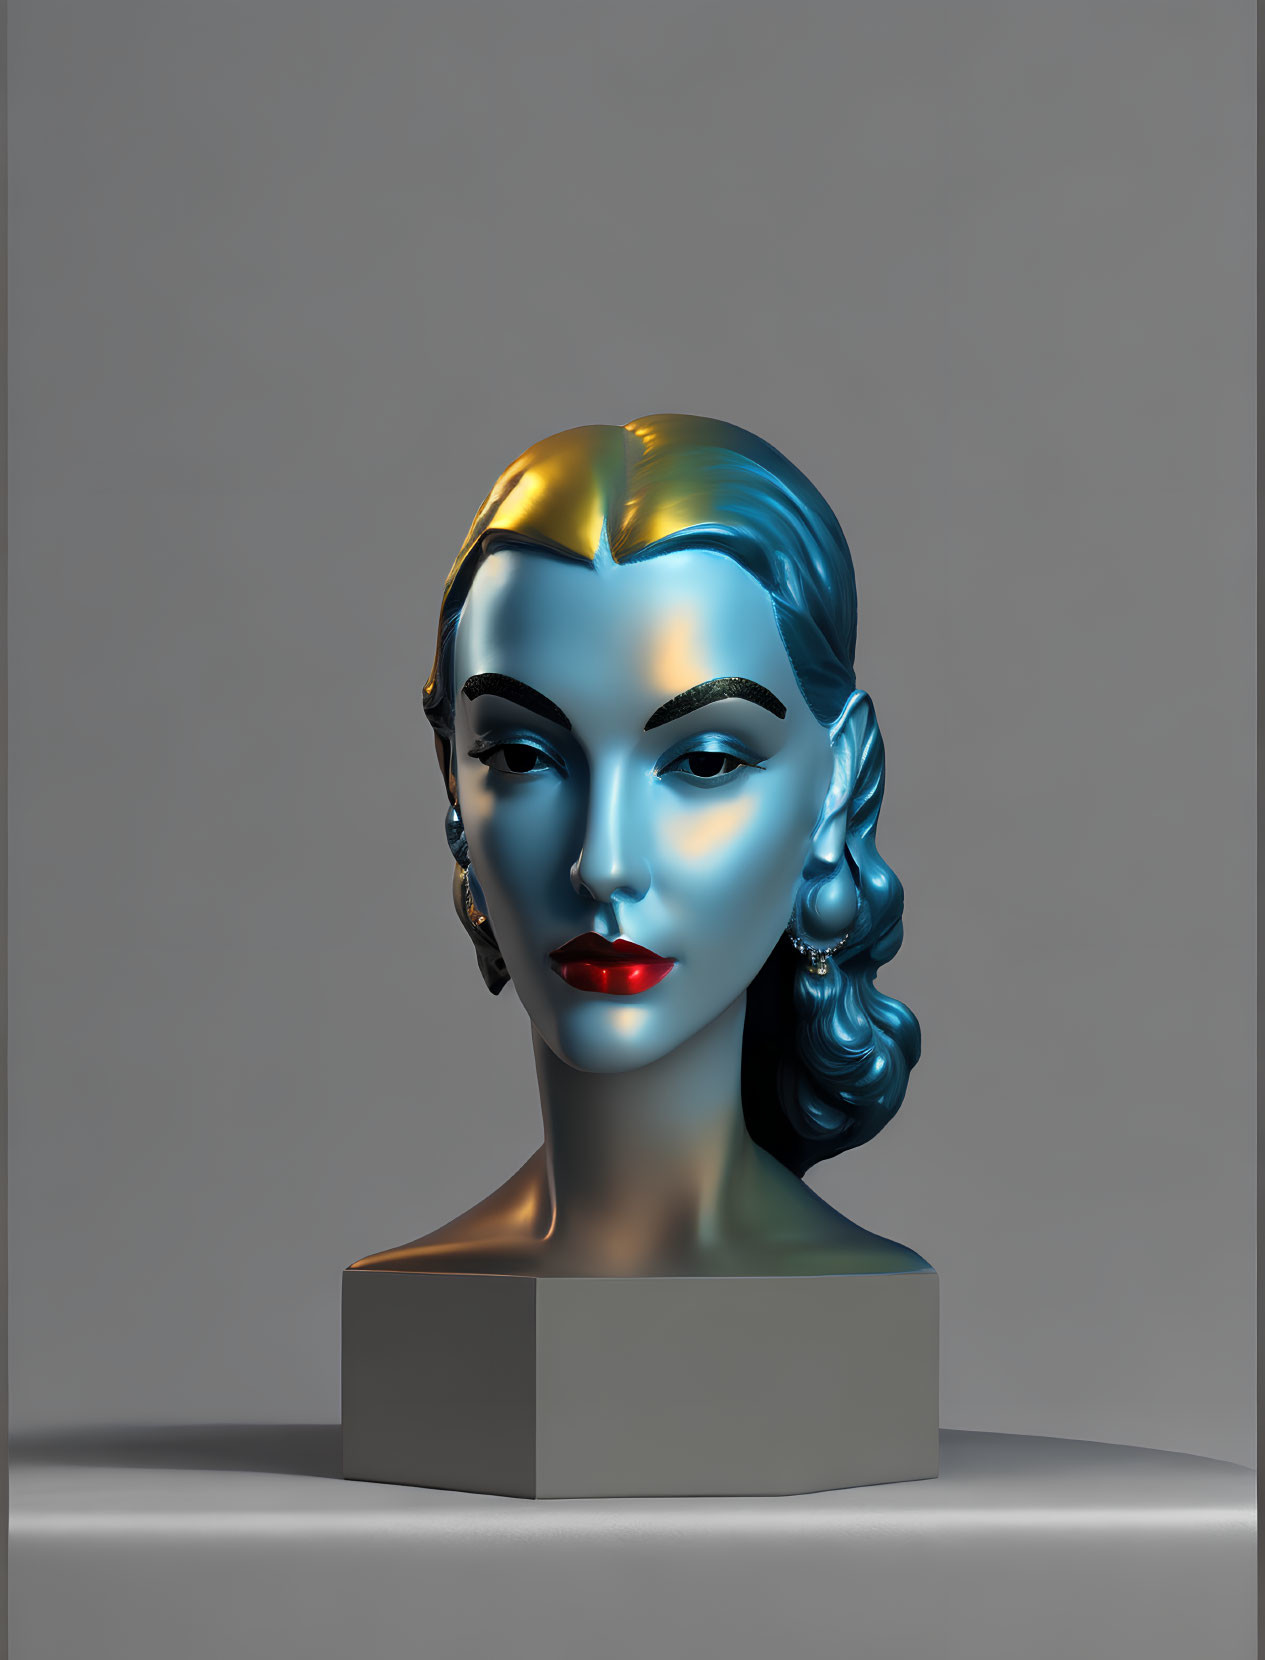 Multicolored glossy bust of a woman with sleek hair and earrings on pedestal